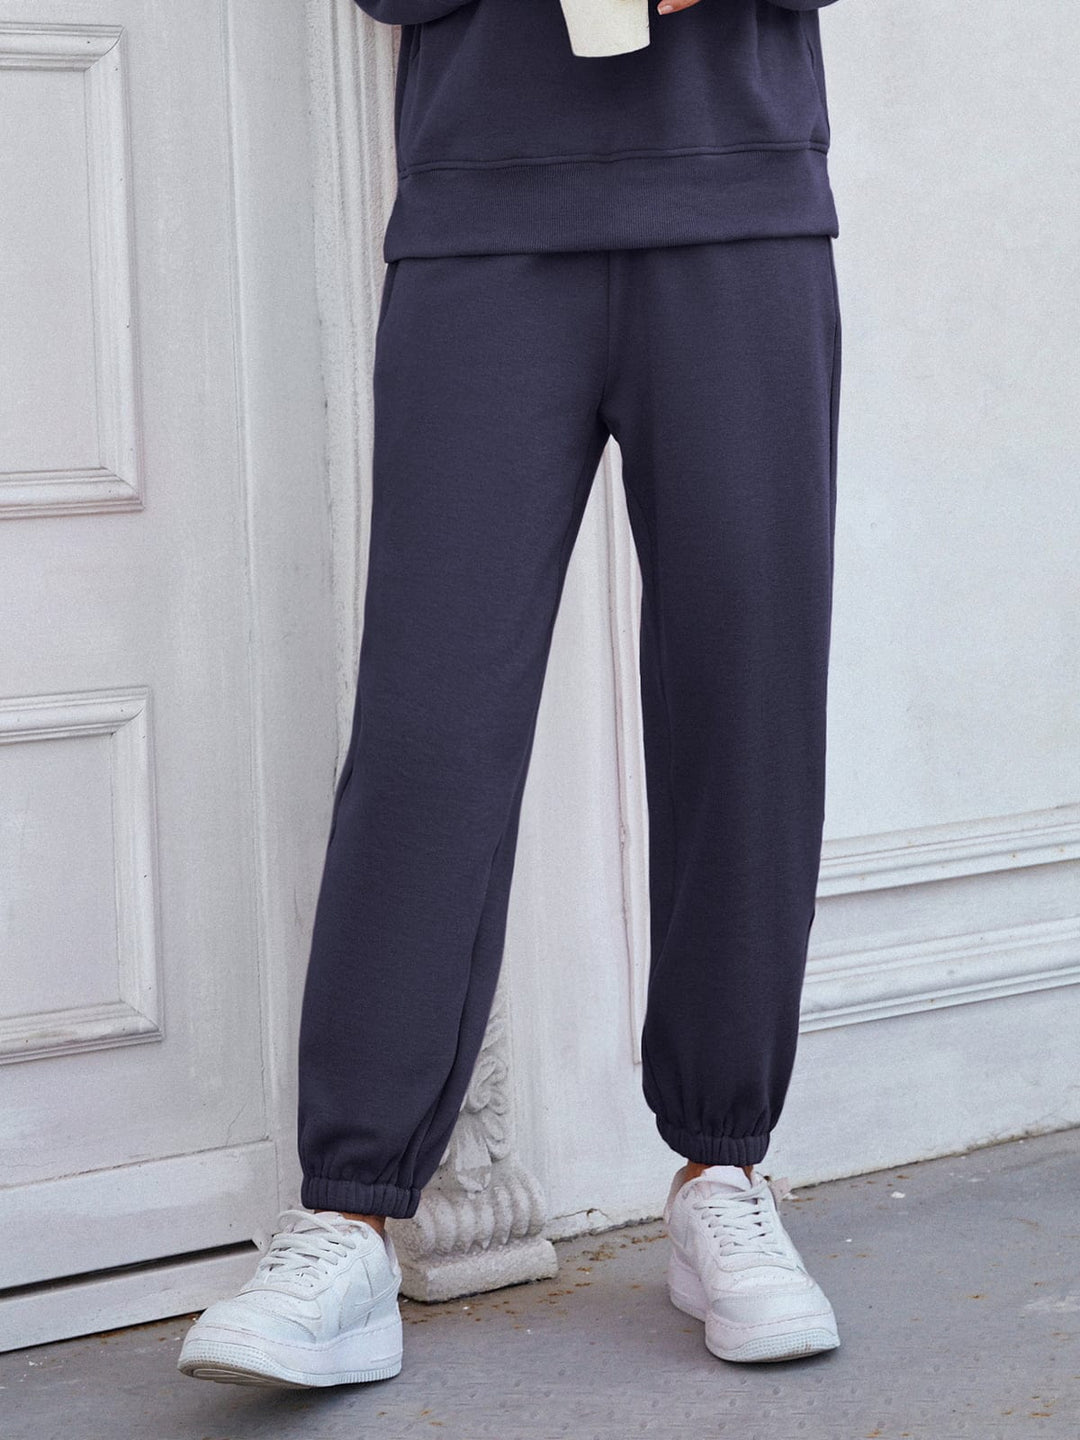 The802Gypsy bottoms/sweatpants GYPSY-Elastic Waist Joggers with Pockets